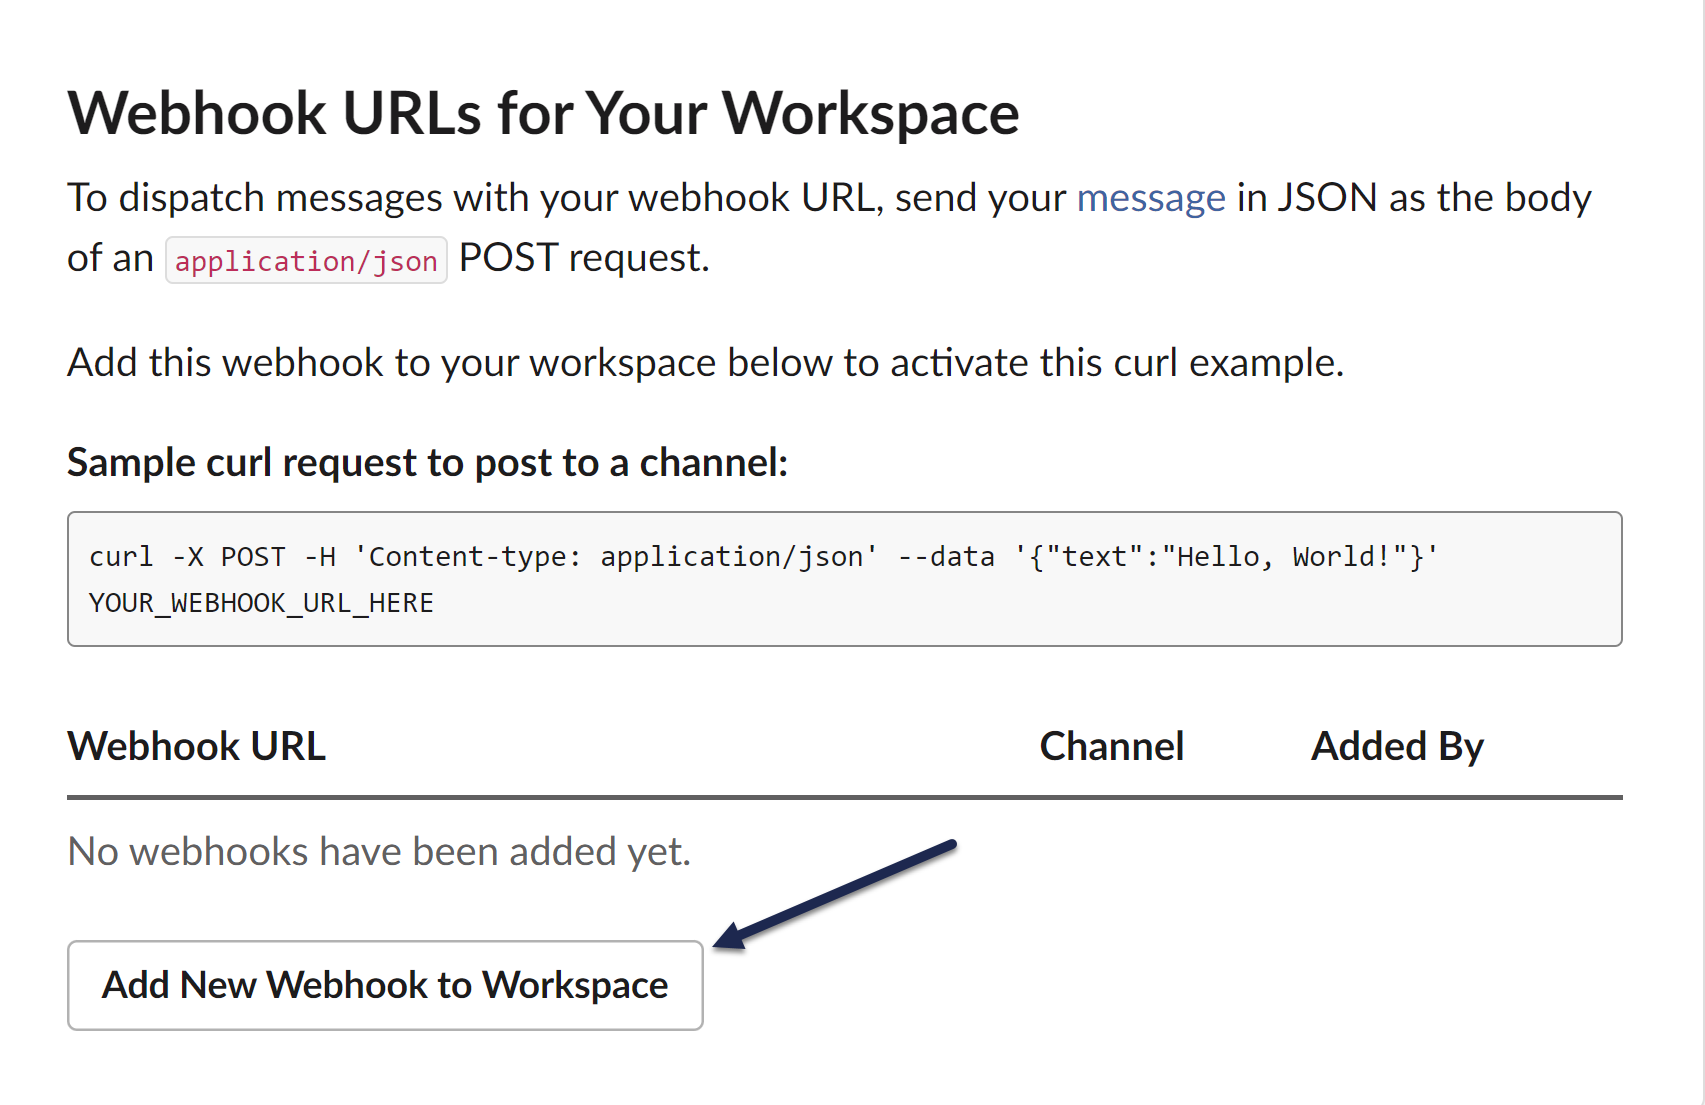 A screenshot of the Webhook URLs for Your Workspace section of the Slack App with an arrow pointing at the Add New Webhook to Workspace button